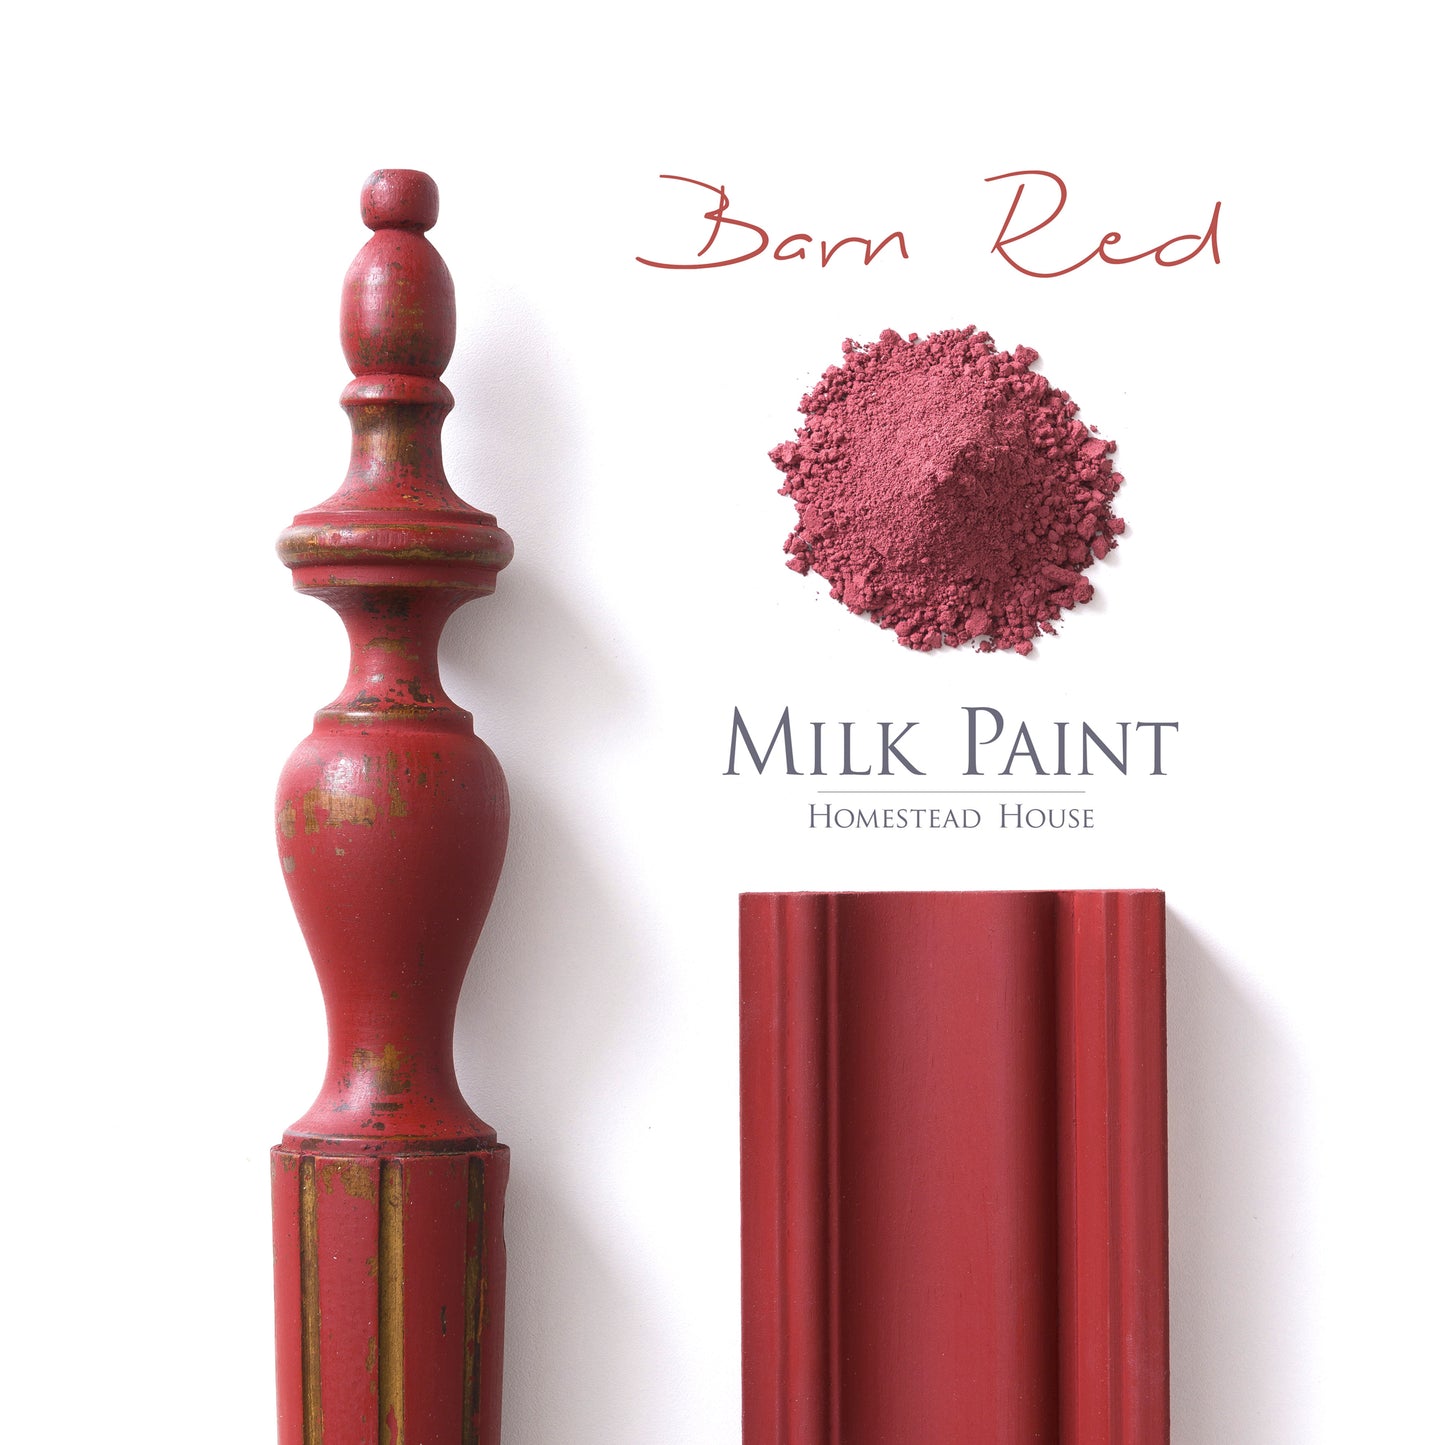 Milk Paint from Homestead House in Barn Red, a rustic red.  |  homesteadhouse.ca